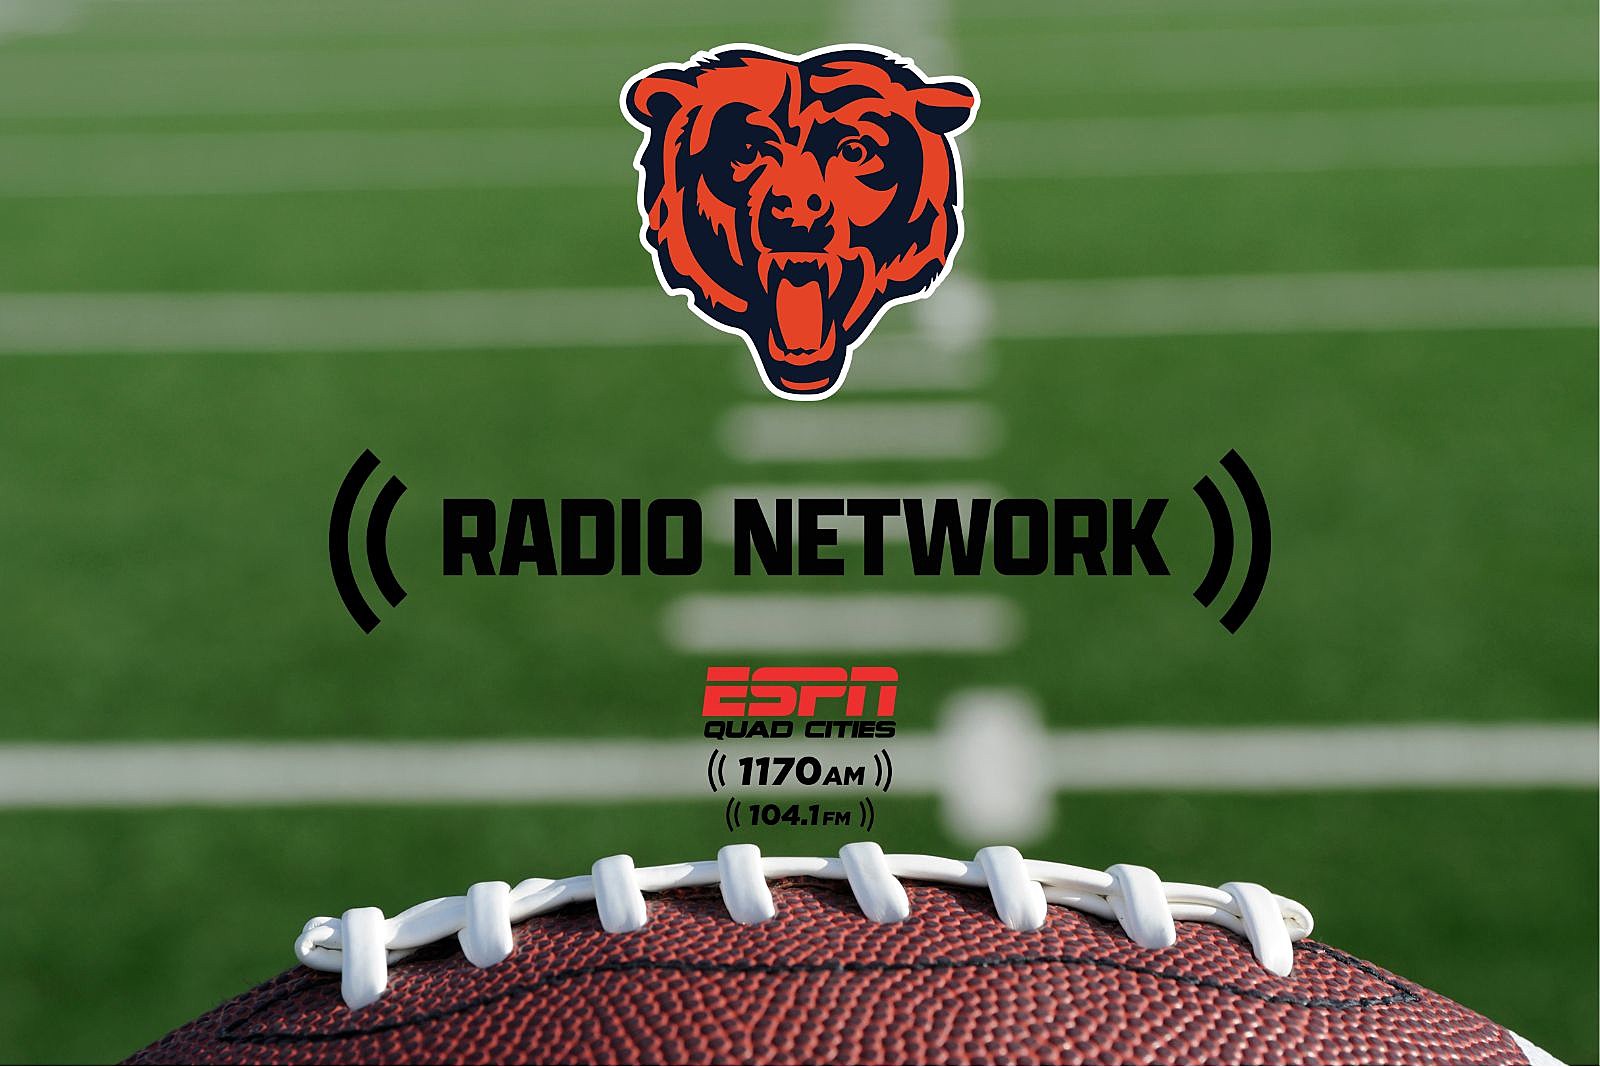 How to watch, listen to Chicago Bears at Seattle Seahawks